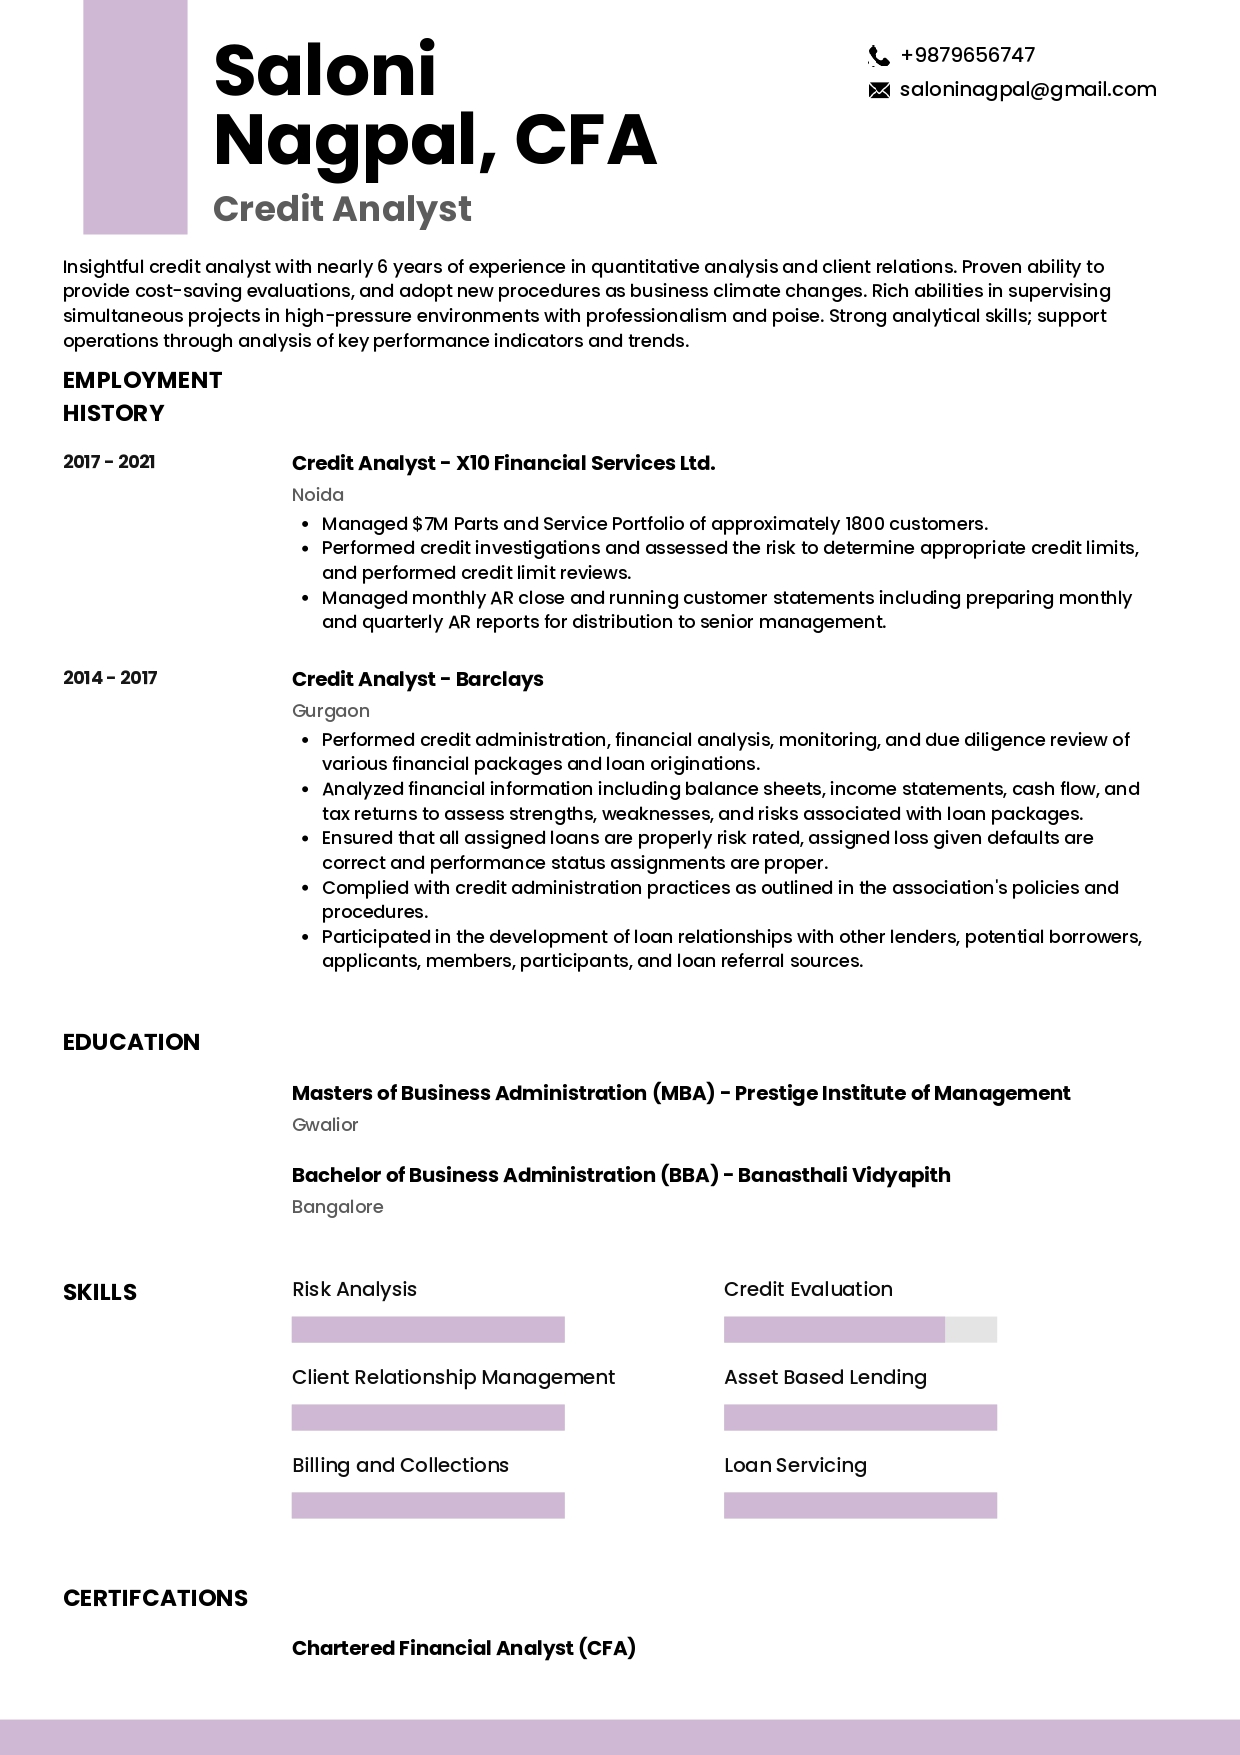 Sample Resume of Credit Analyst | Free Resume Templates & Samples on Resumod.co